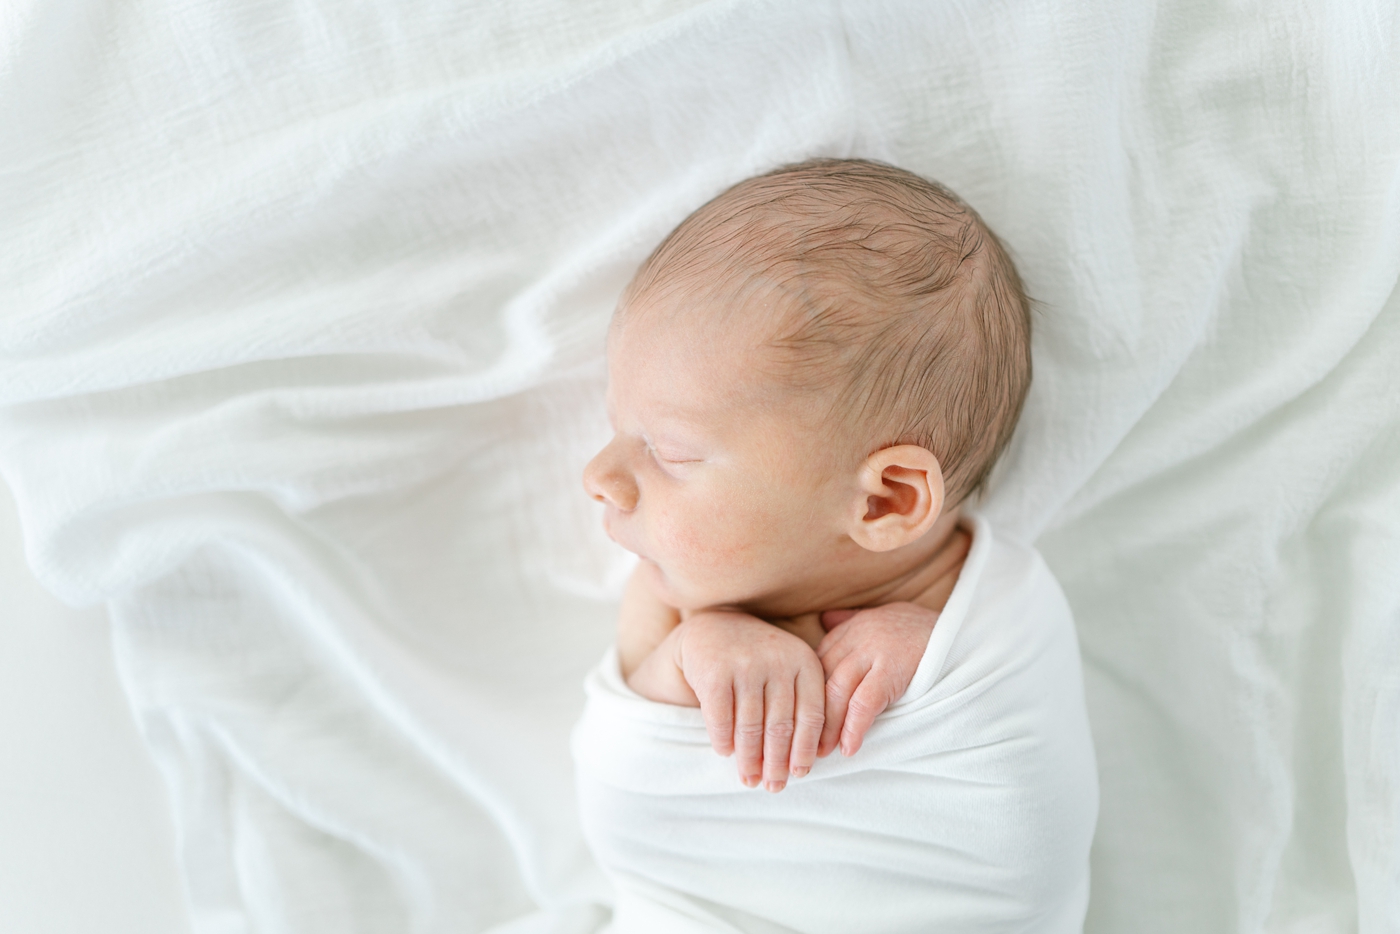 Baby sleeping in white swaddle during newborn session. Photo by Lauren Sosler Photography.